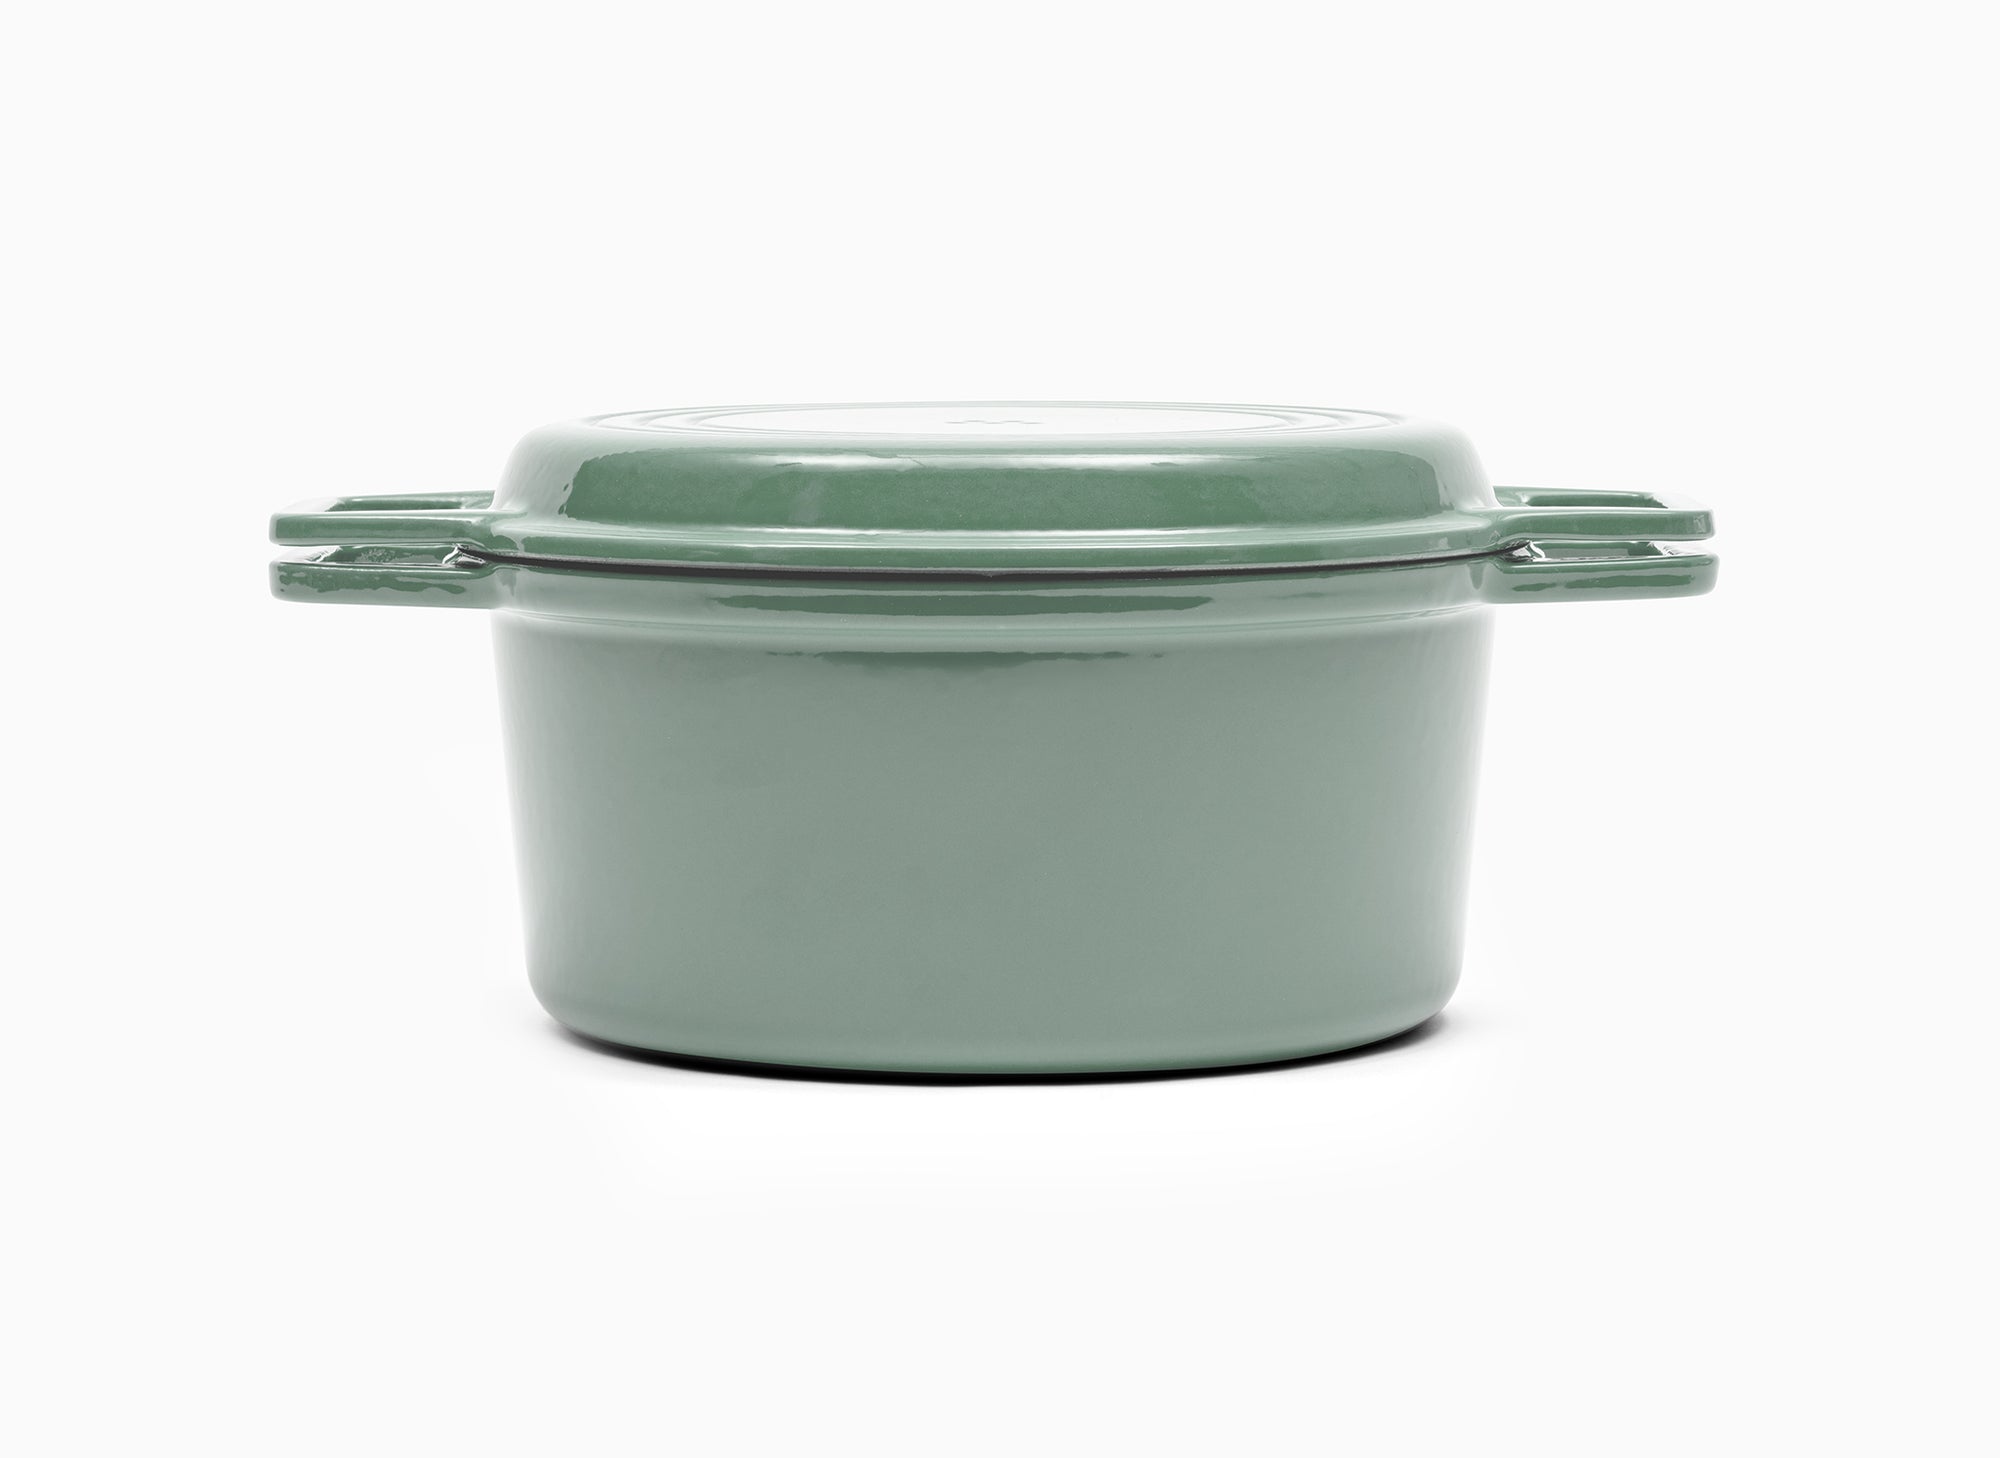 Green Misen Dutch Oven covered by Grill Lid.